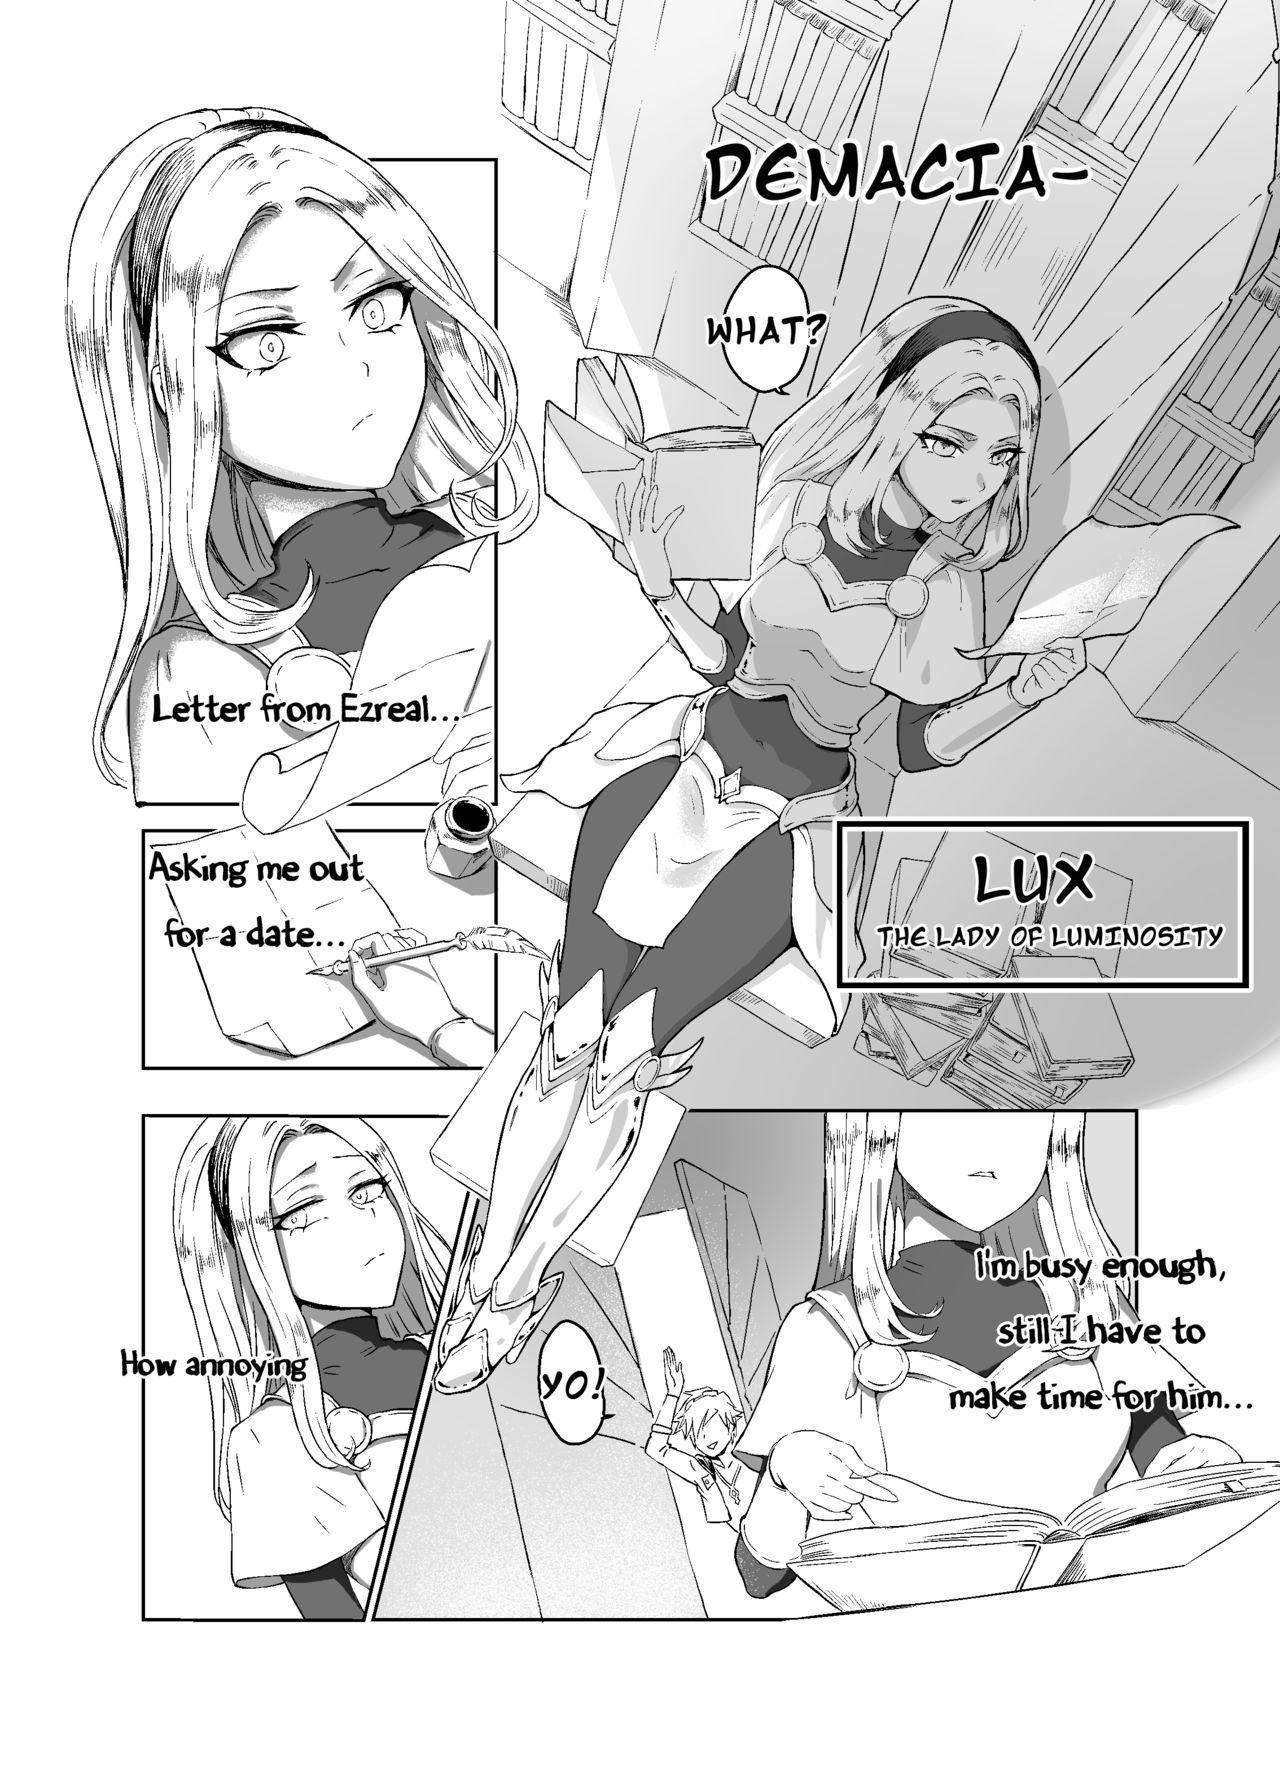 Fake Tits Lux x Viego ft. Ezreal - League of legends Masterbation - Page 2